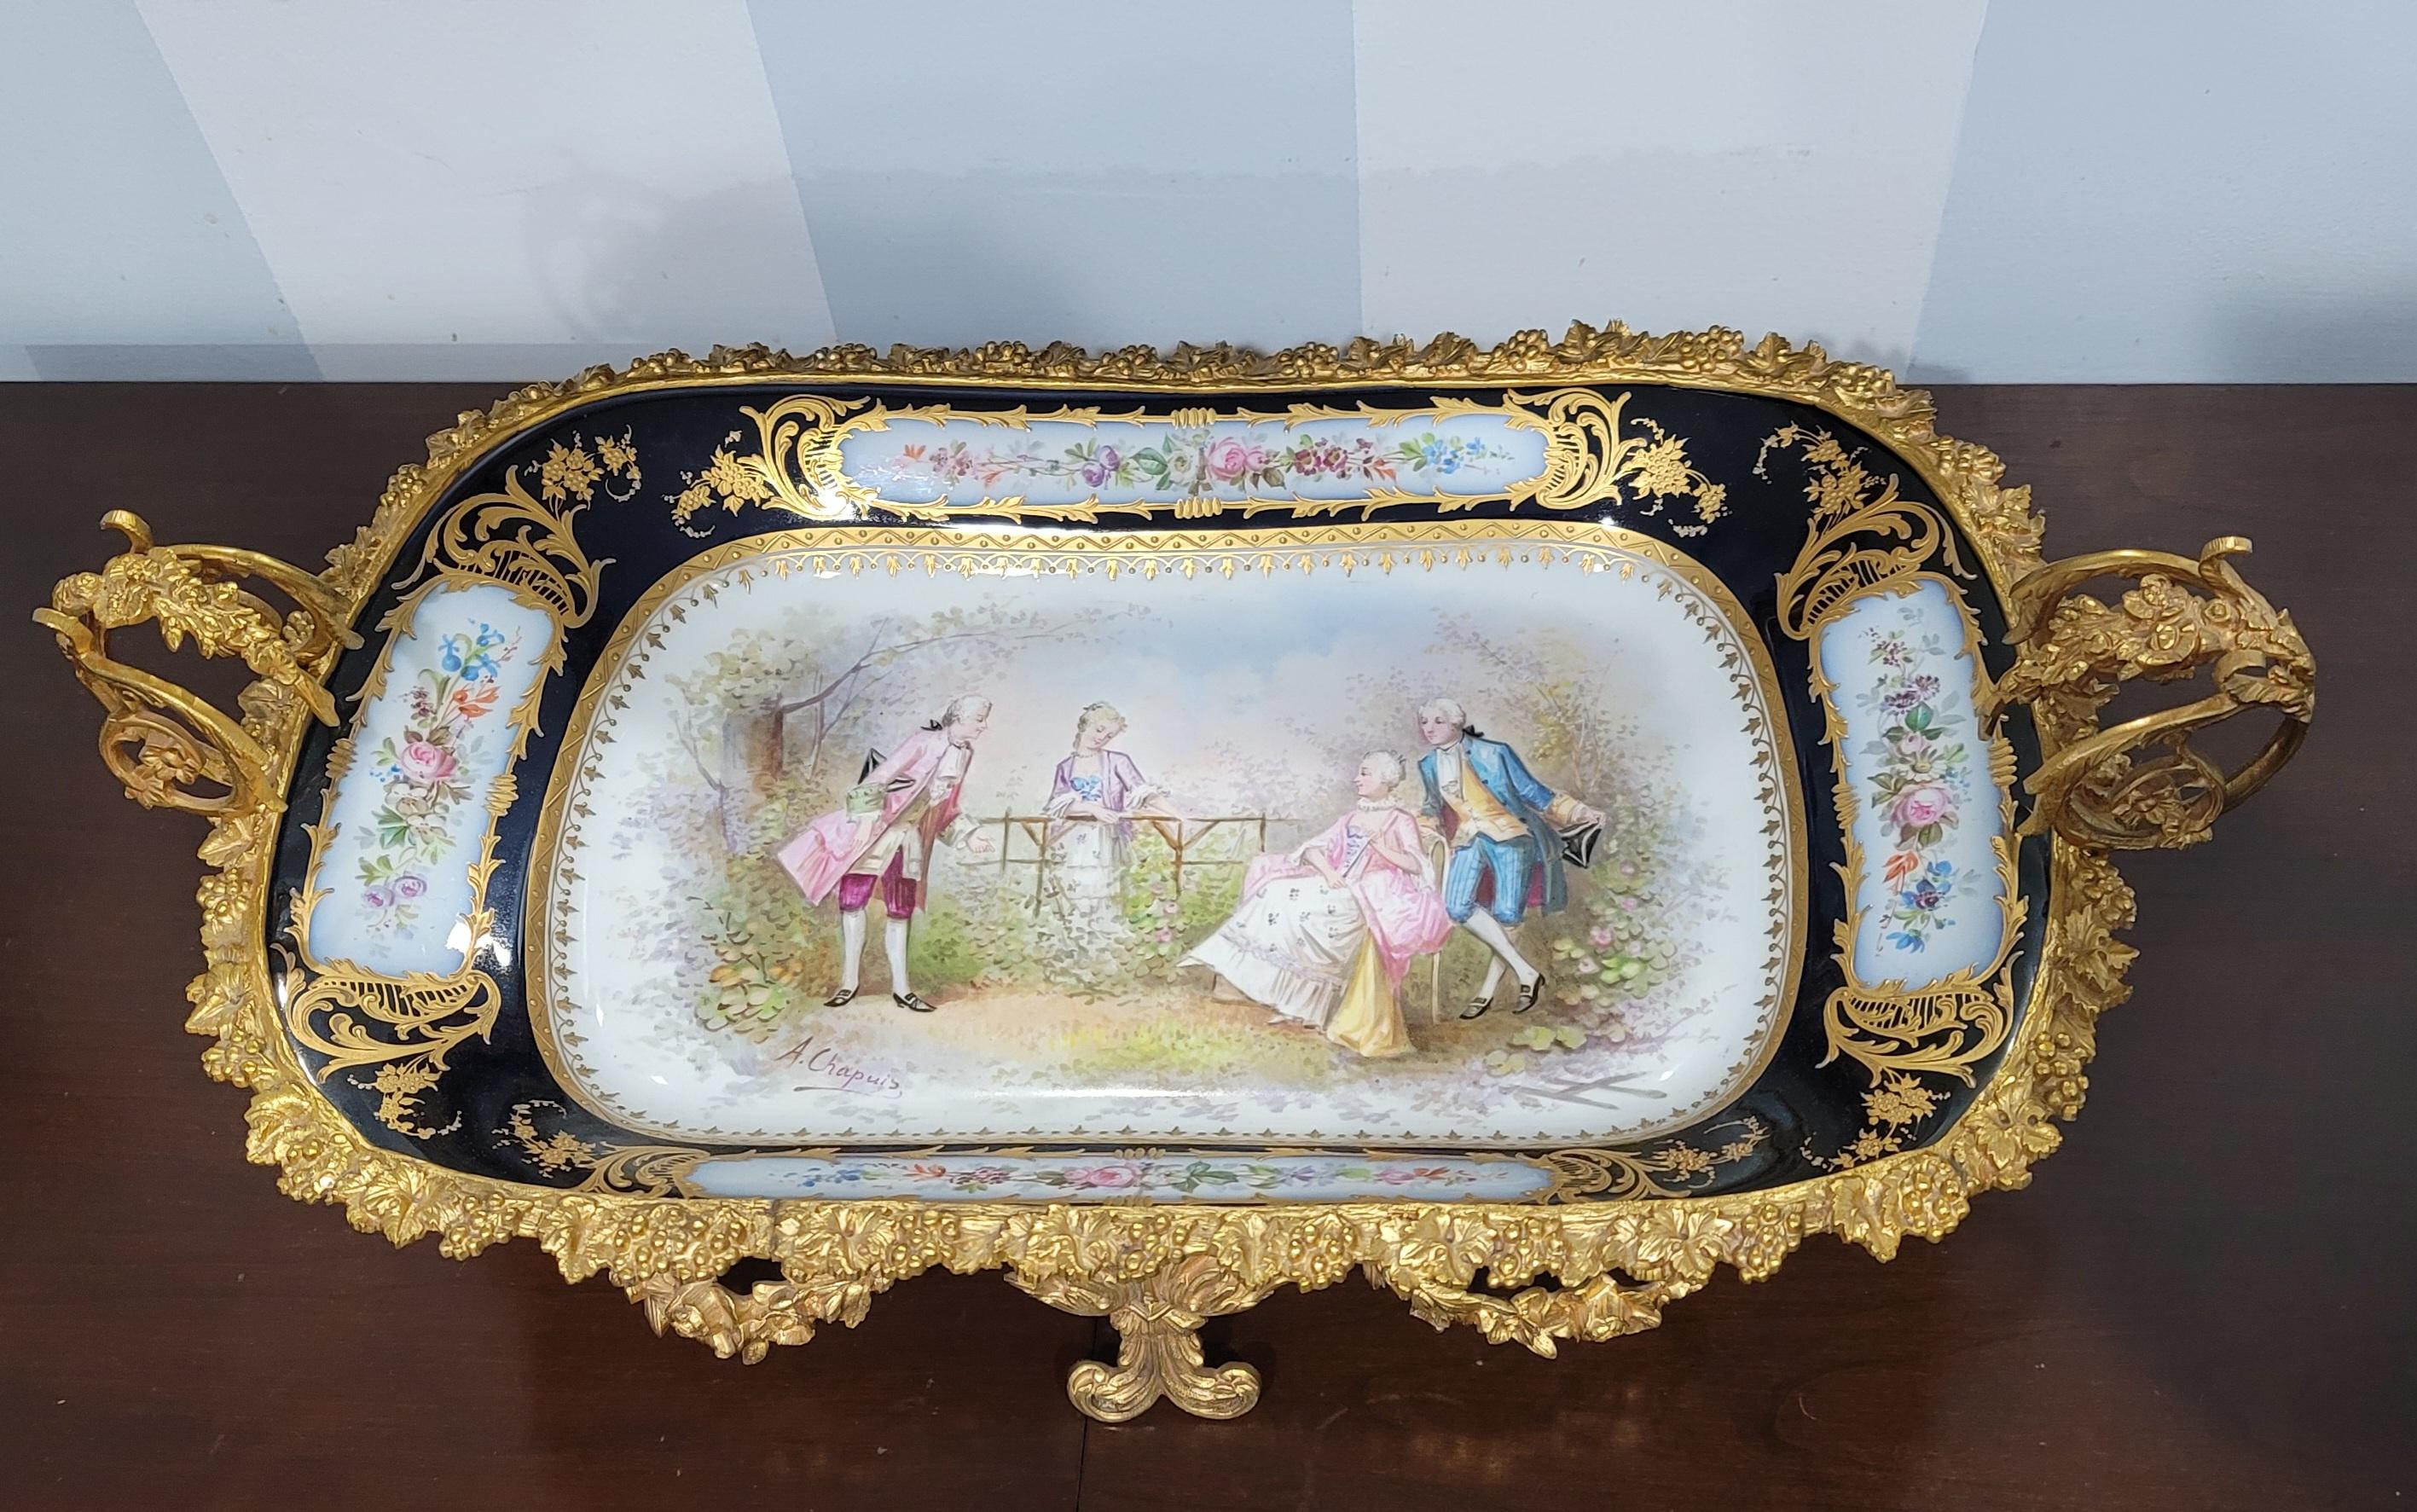 A 19th century Sevres hand-painted, cobalt & gilt porcelain ormolu mounted two-handle Centerpiece signed by French Artist A Chapuis. Intricate ormolu designs and decorations with acanthus leaves, flowers and other decoration.
Beautiful Large